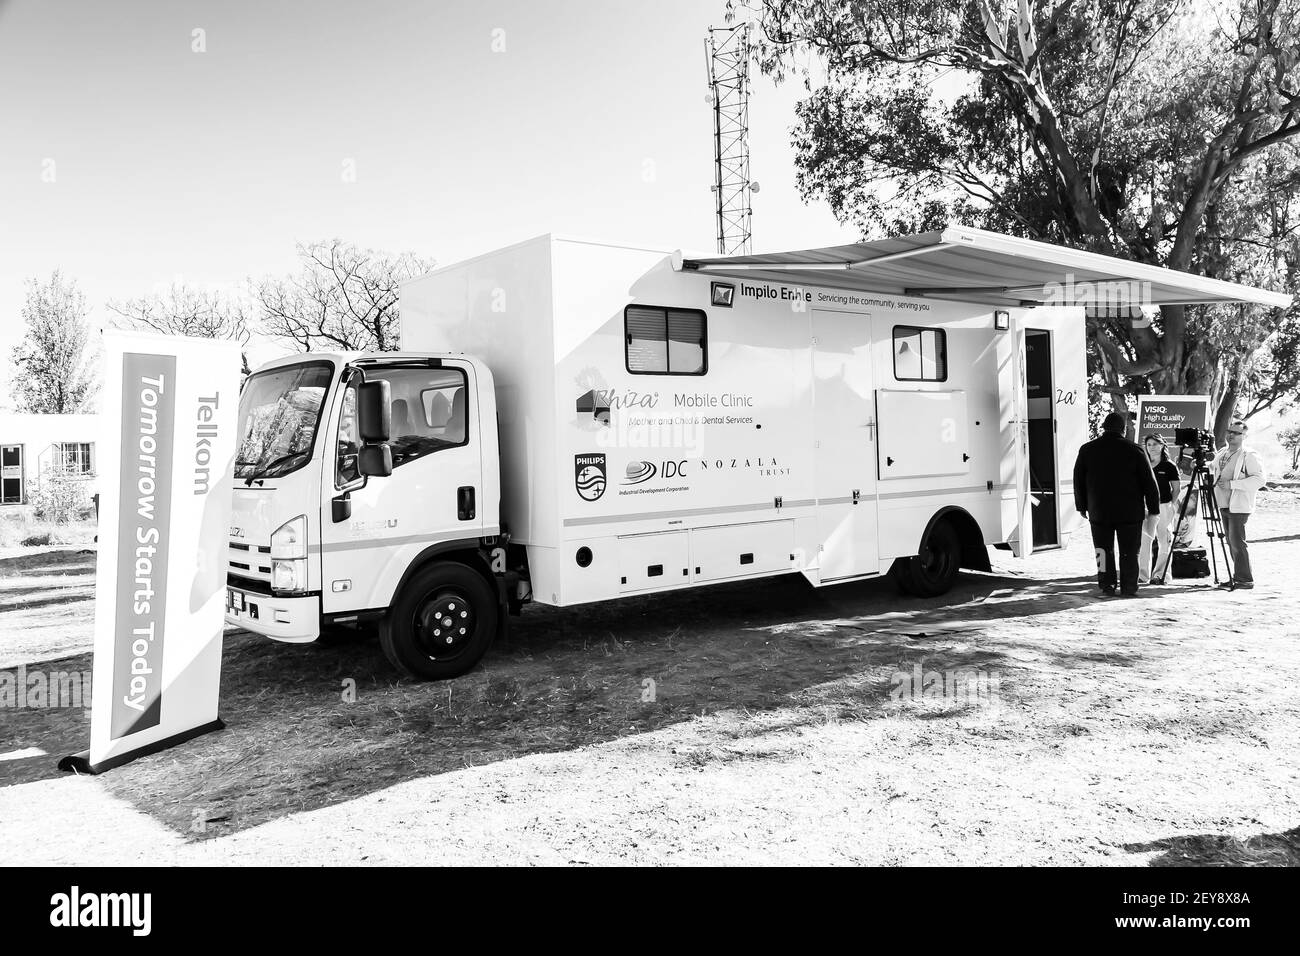 JOHANNESBURG, SOUTH AFRICA - Jan 05, 2021: Johannesburg, South Africa - May 14 2015: Mobile Clinic for Mother and Child and Dental Services Stock Photo